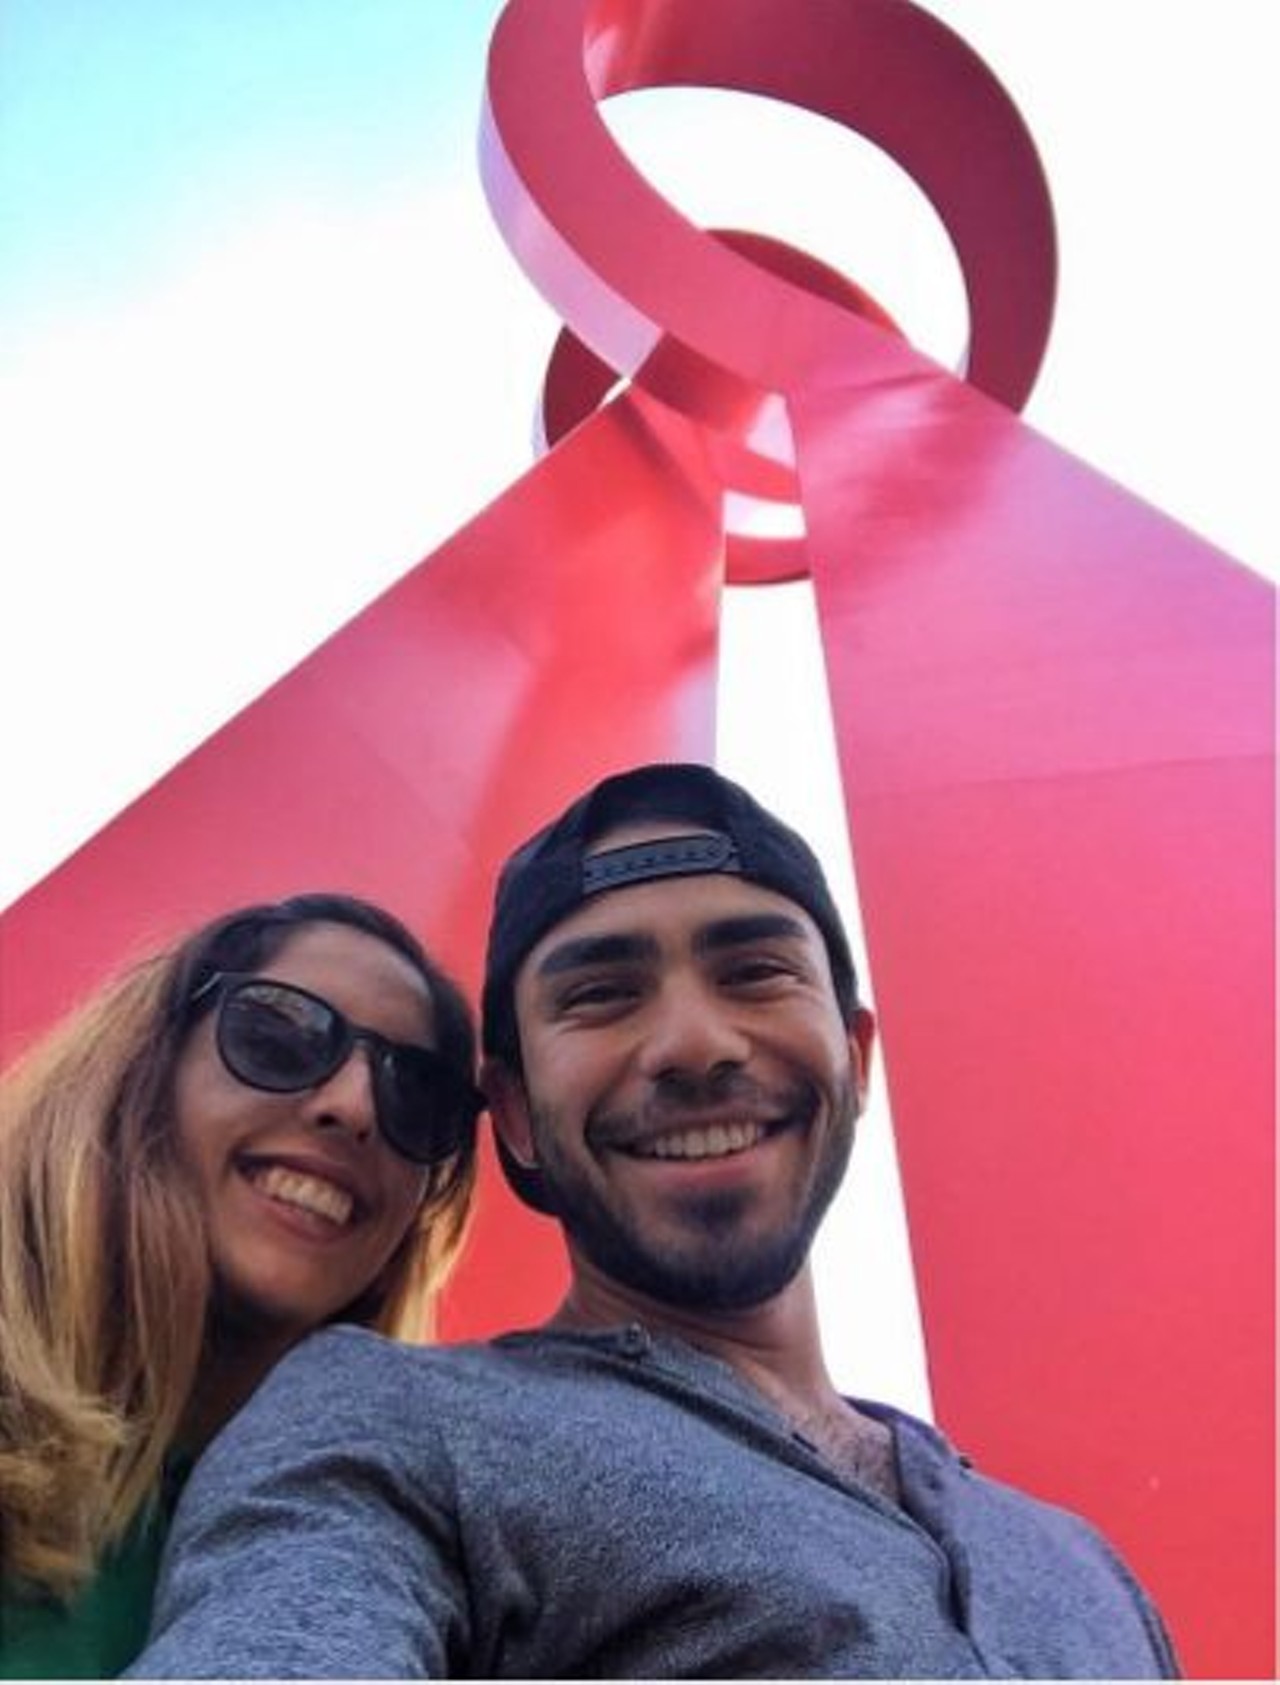 The Torch of Friendship
333 Losoya St.
Get your friends together for a selfie at the Torch of Friendship. 
Photo via Instagram 
goodyear_a
